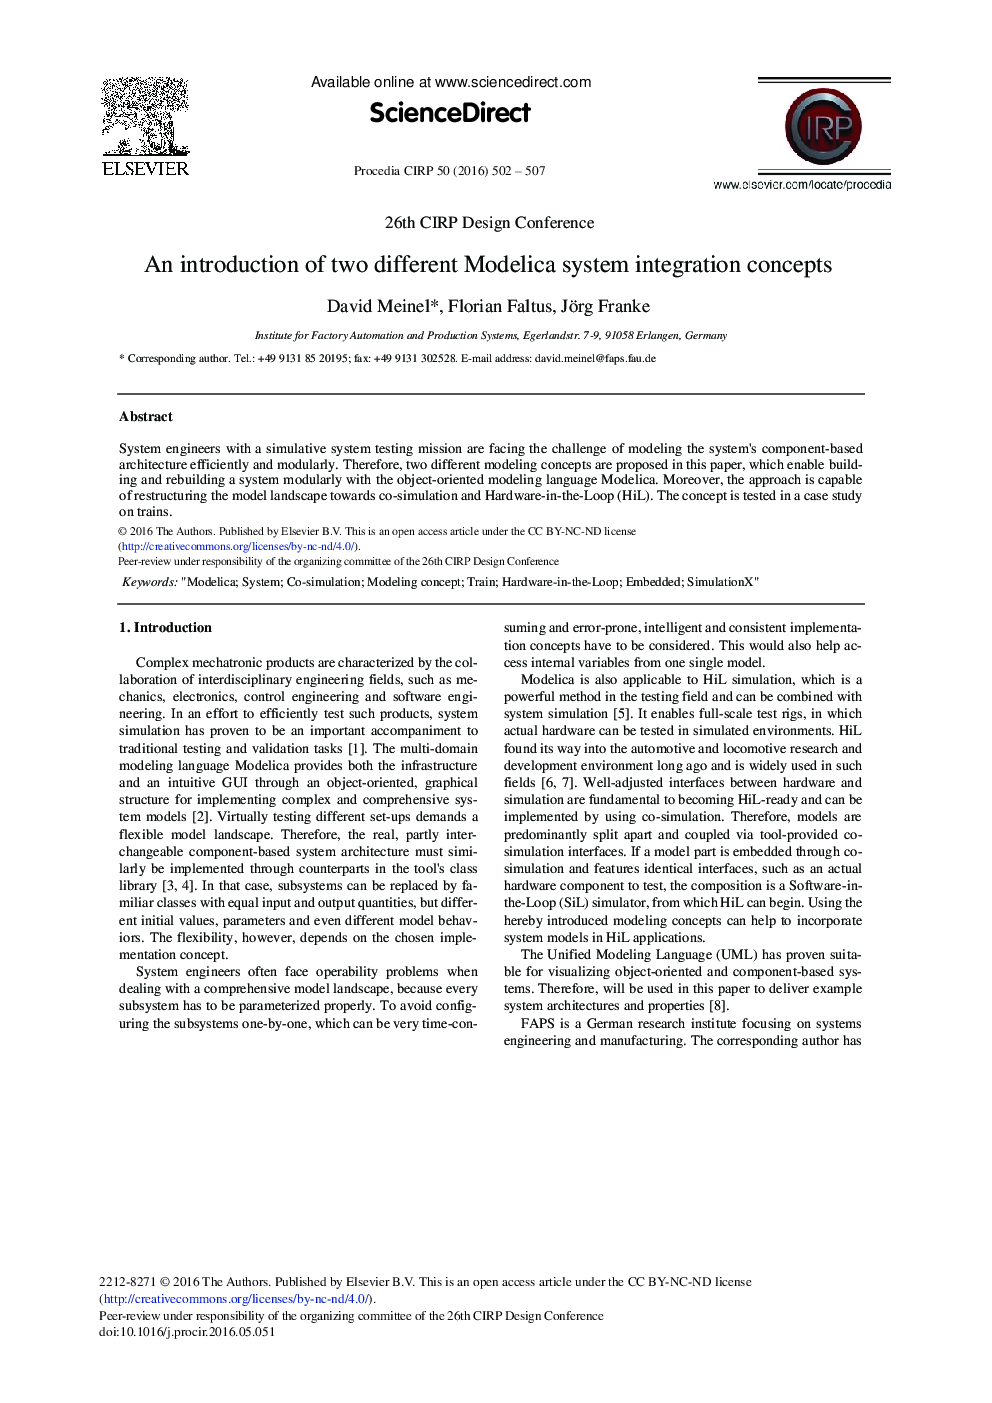 An Introduction of Two Different Modelica System Integration Concepts 